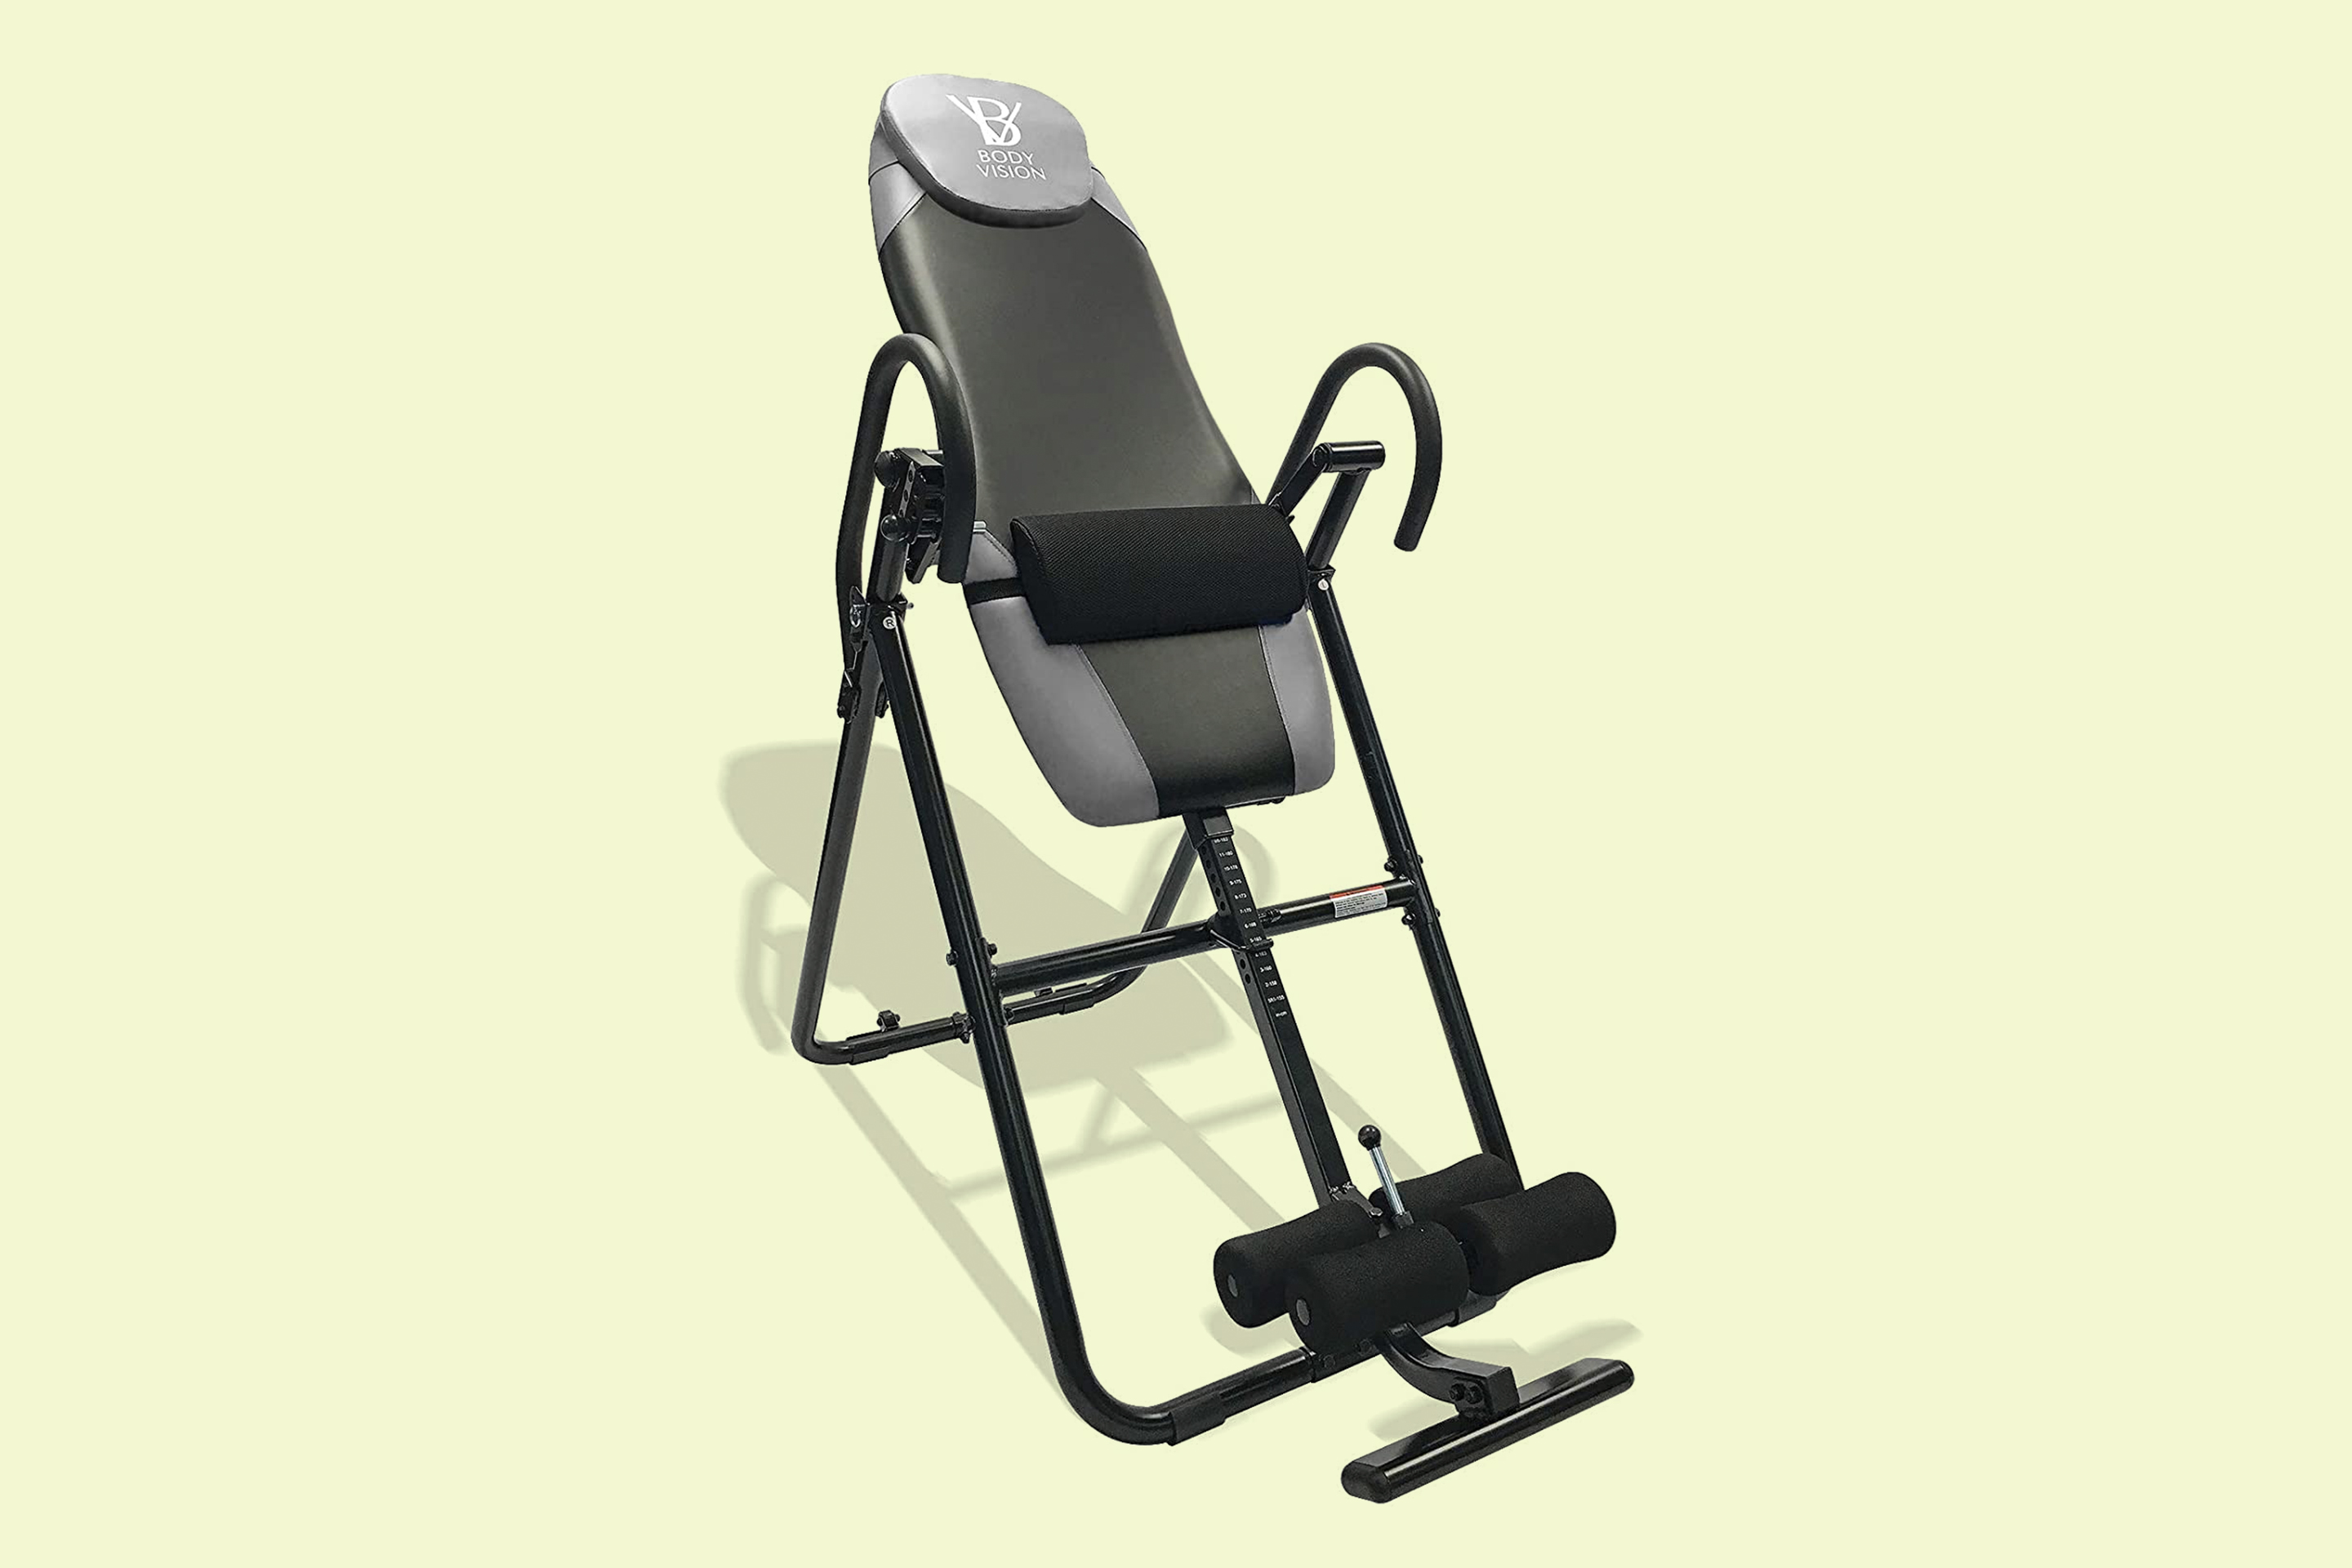 Best inversion table